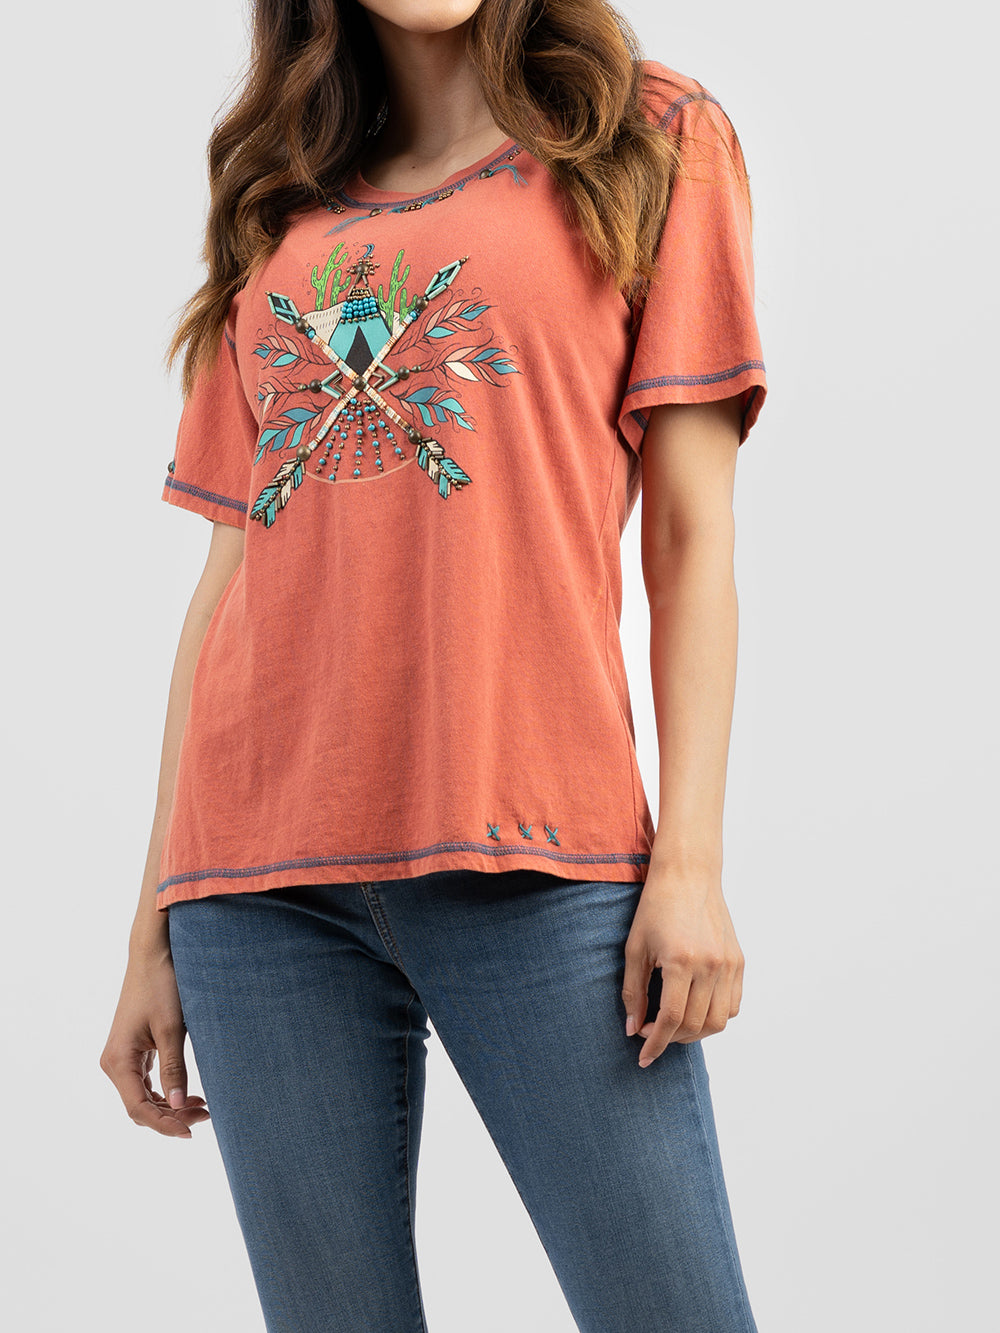 Women's Mineral Wash Retro Graphic Short Sleeve Tee - Cowgirl Wear